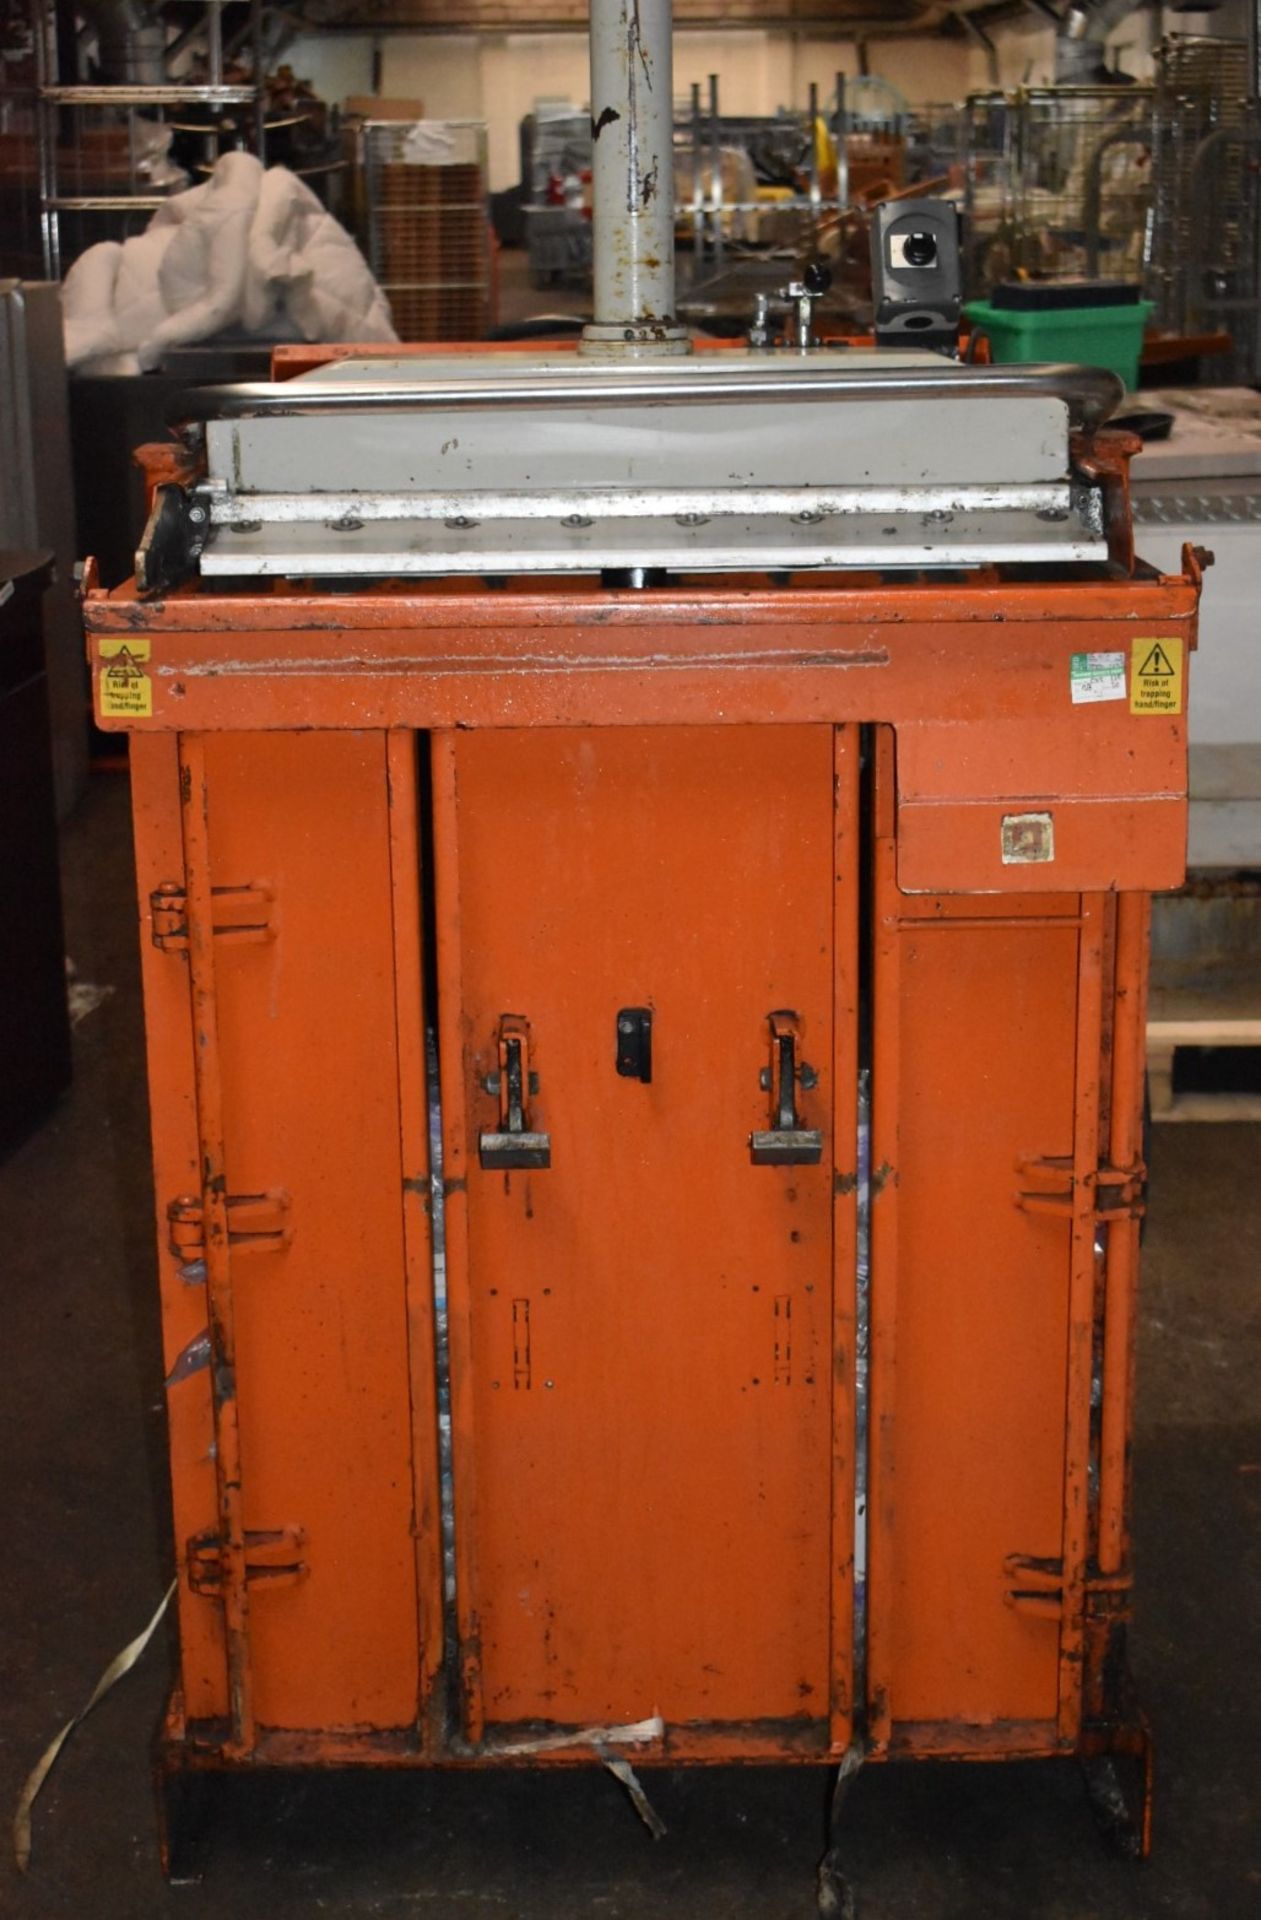 1 x Orwak 5010 Hydraulic Press Compact Cardboard Baler - Used For Compacting Recyclable or Non- - Image 4 of 15